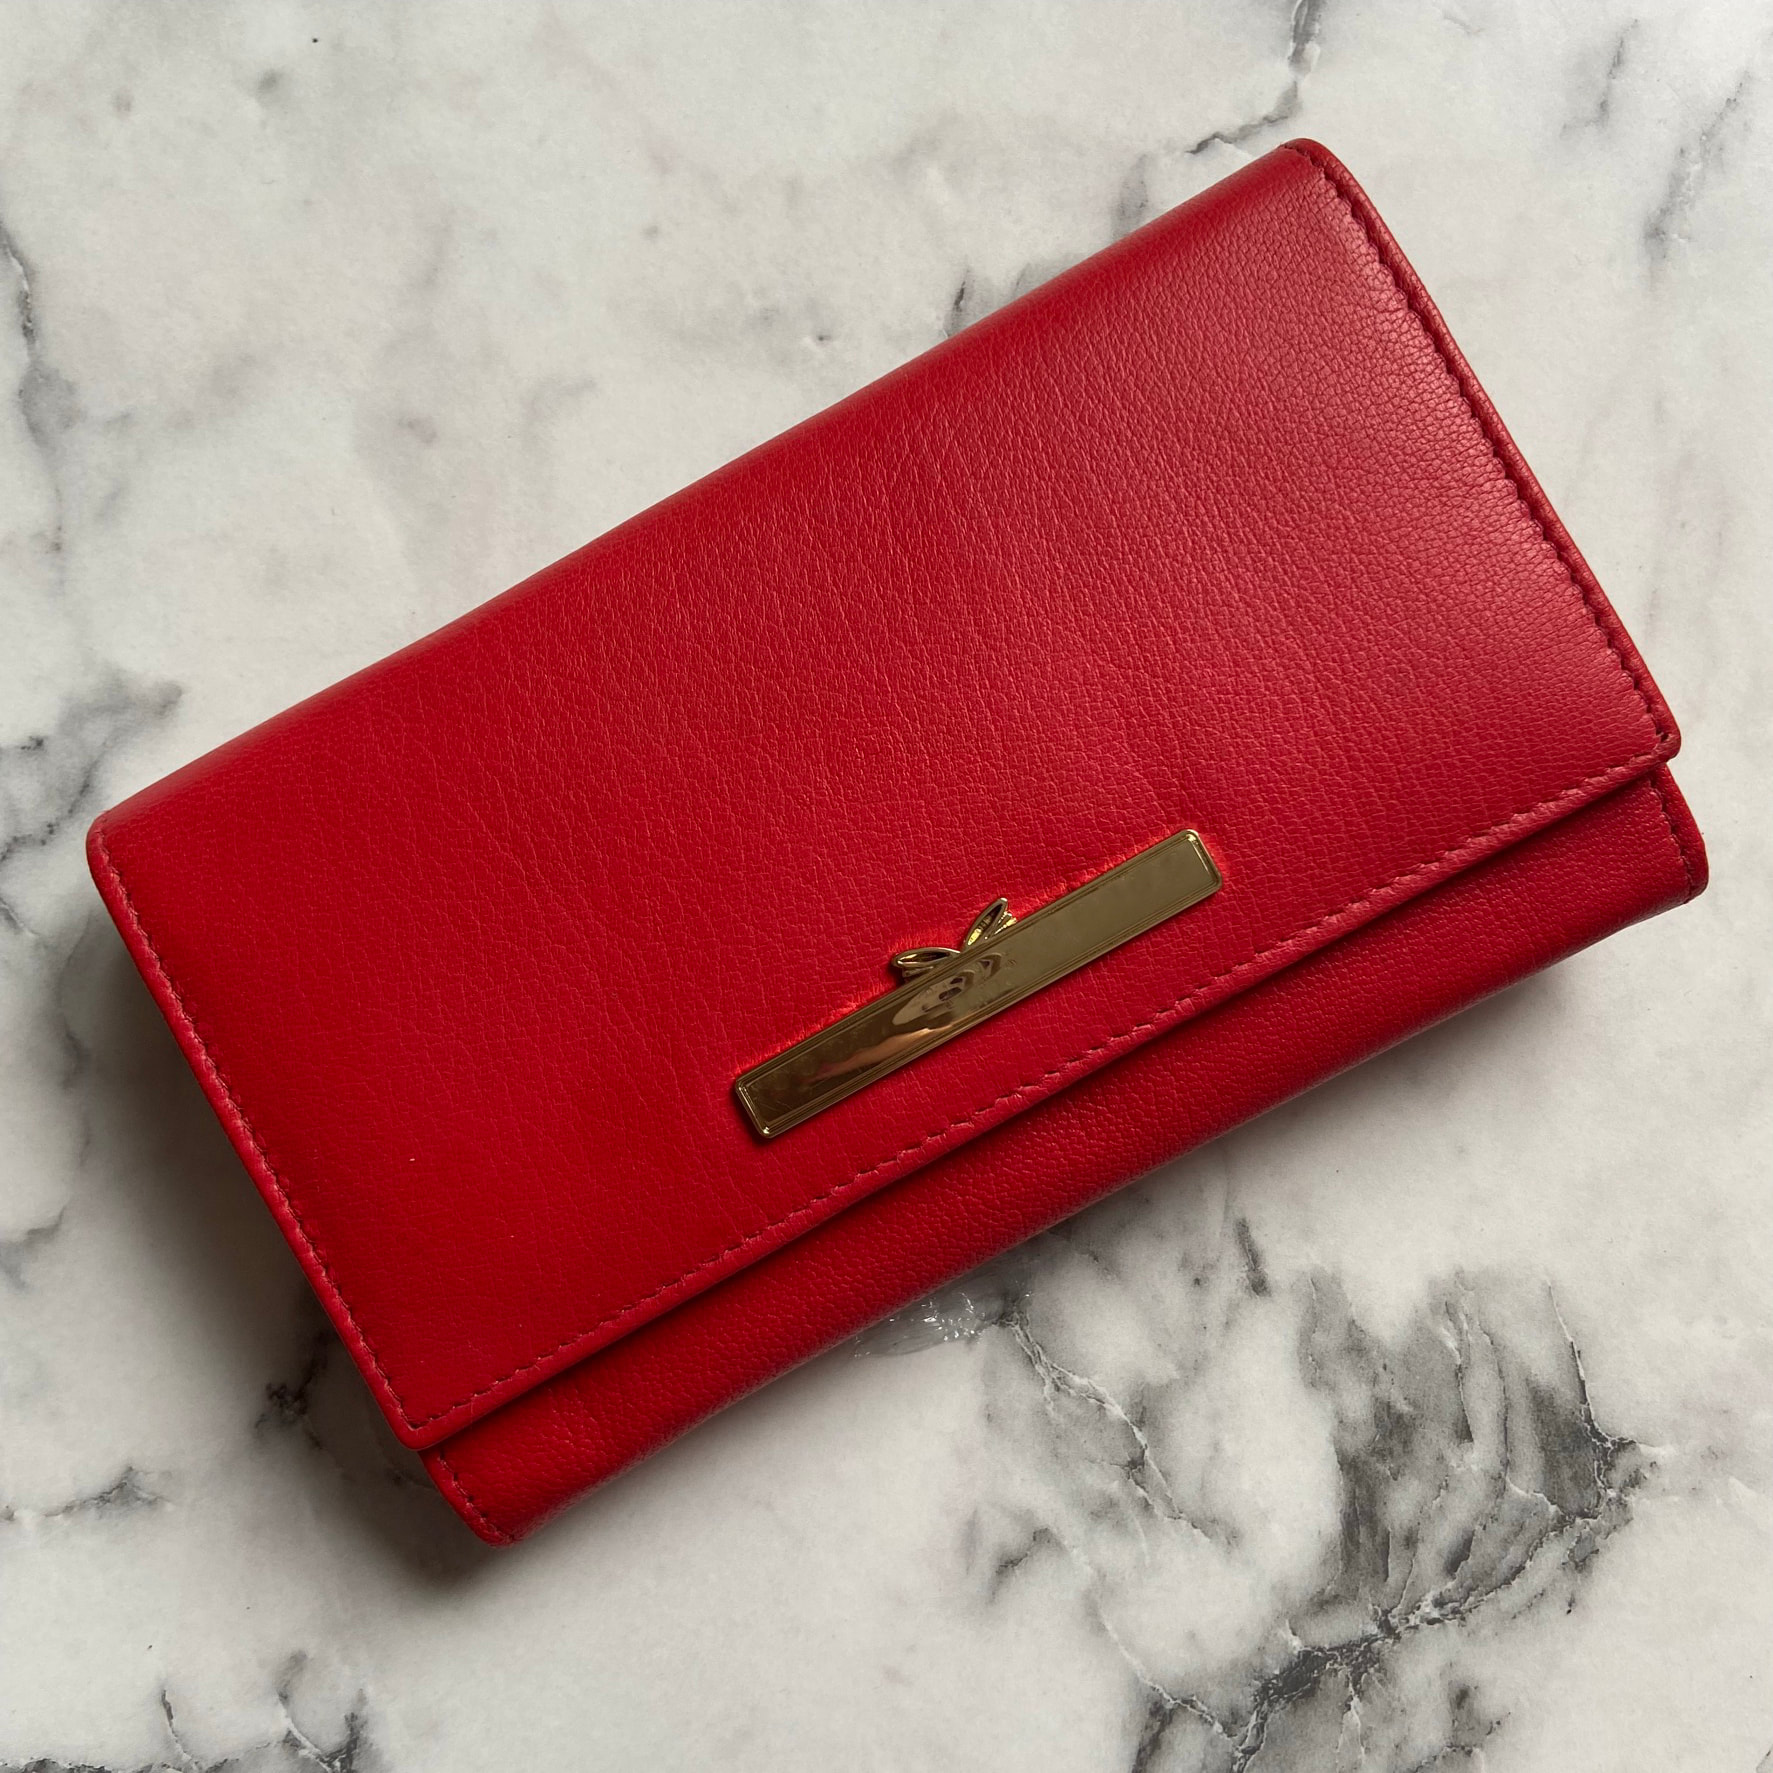 Women's Red Leather Purse